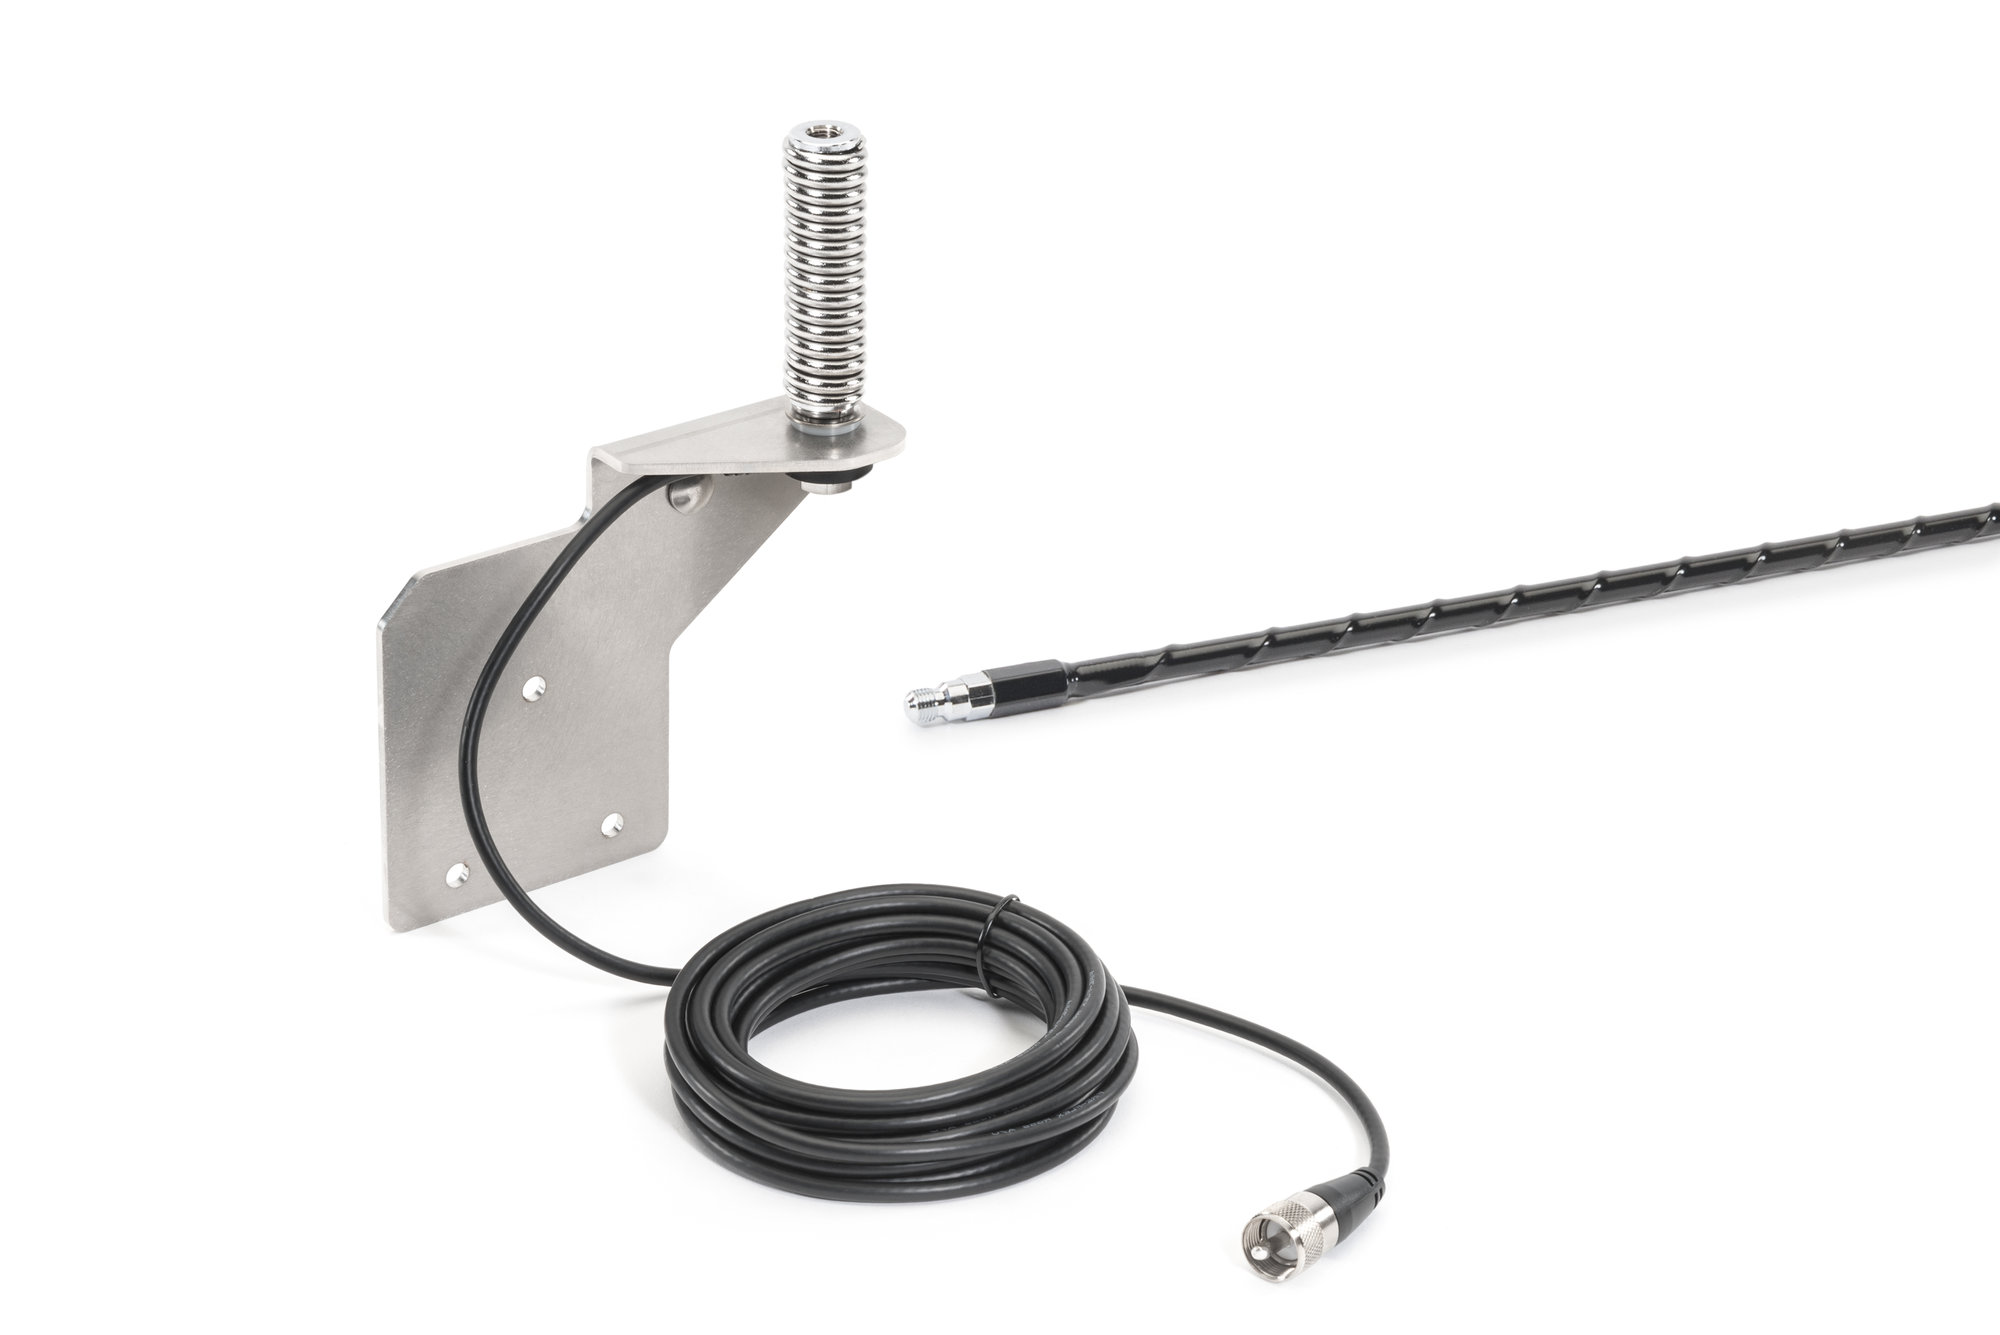 Quadratec Stainless Steel CB Antenna Mount with CB Antenna for 76-02